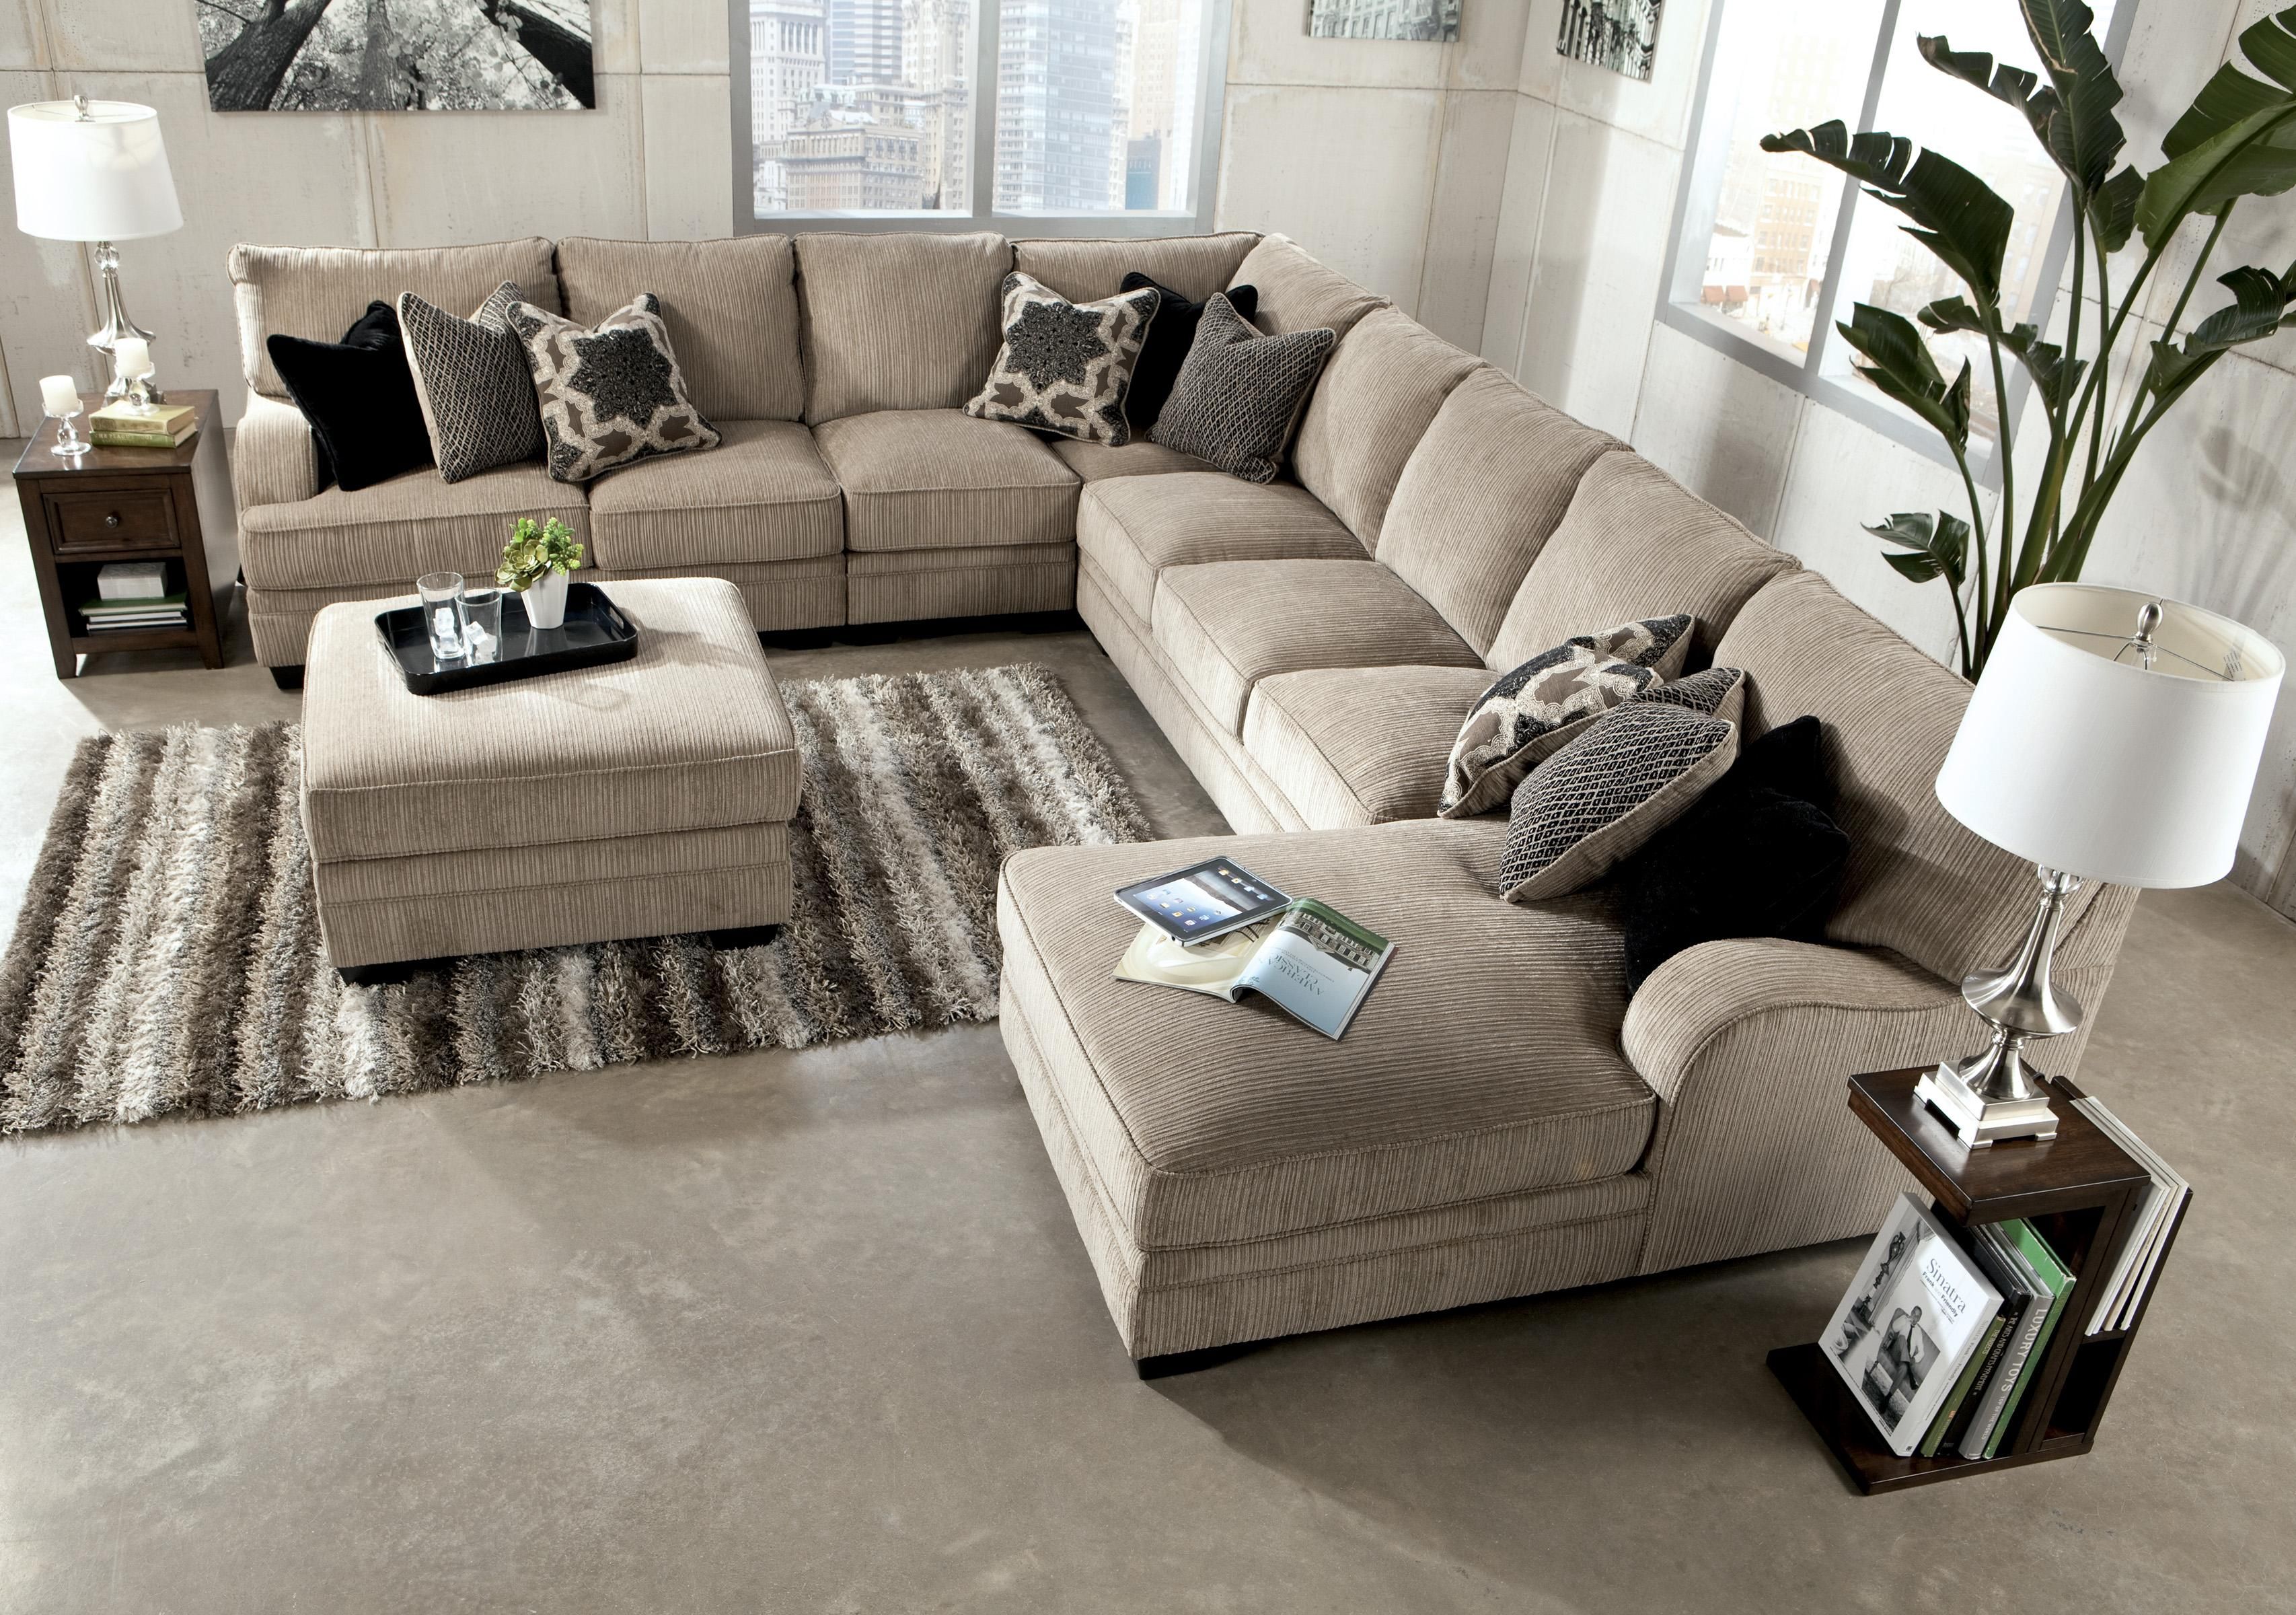 Sectional with chaise | Muebles de sala modernos, Sofás ...